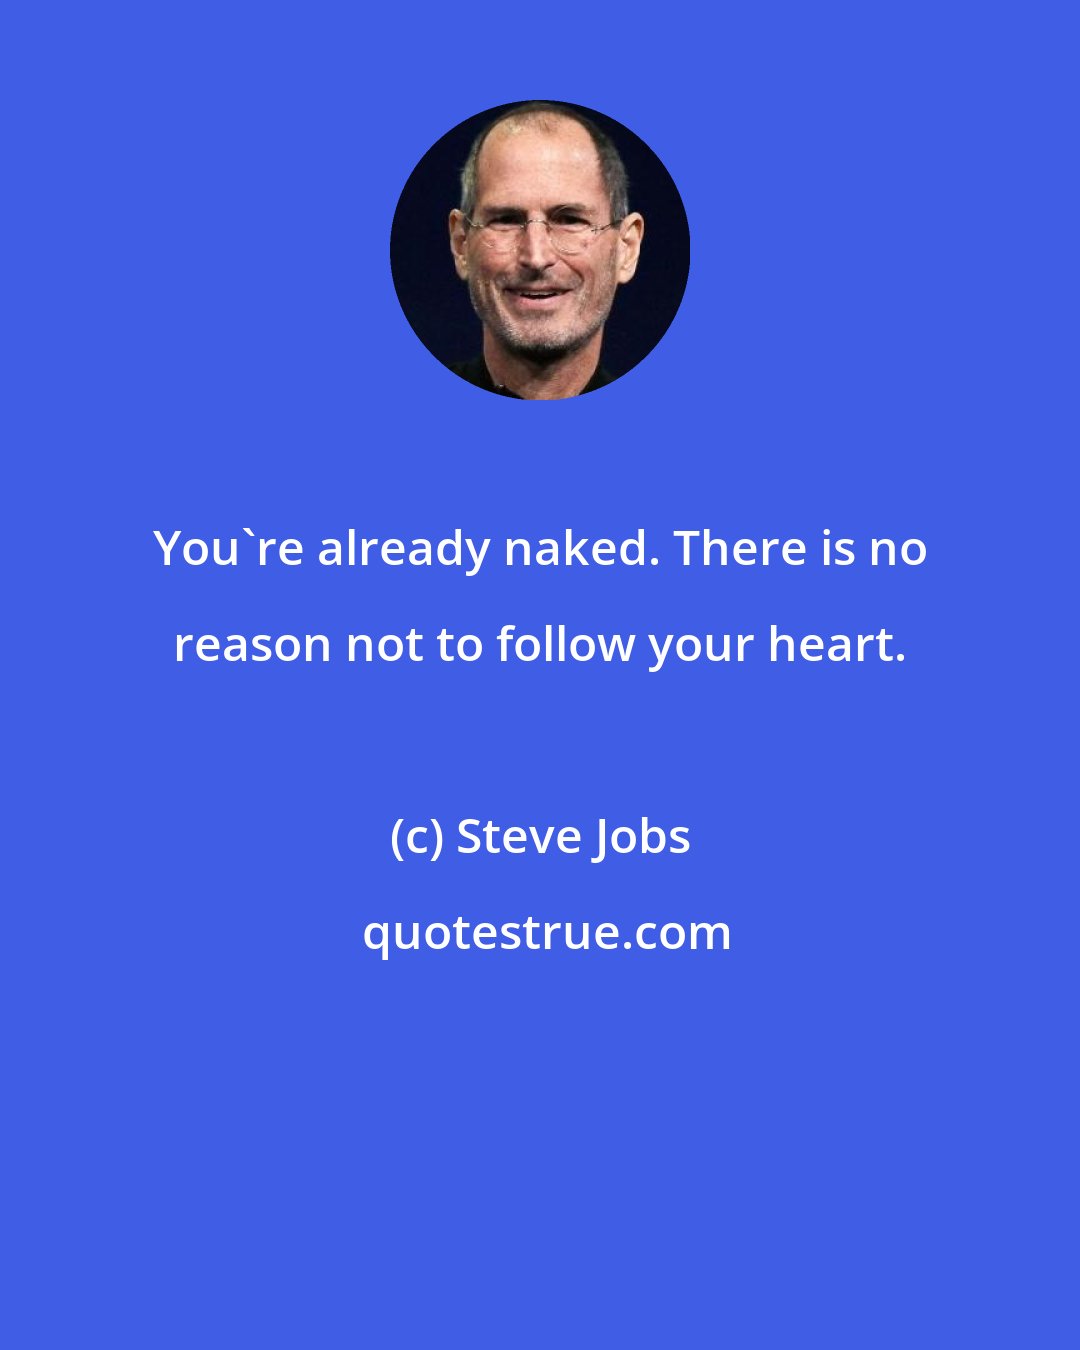 Steve Jobs: You're already naked. There is no reason not to follow your heart.